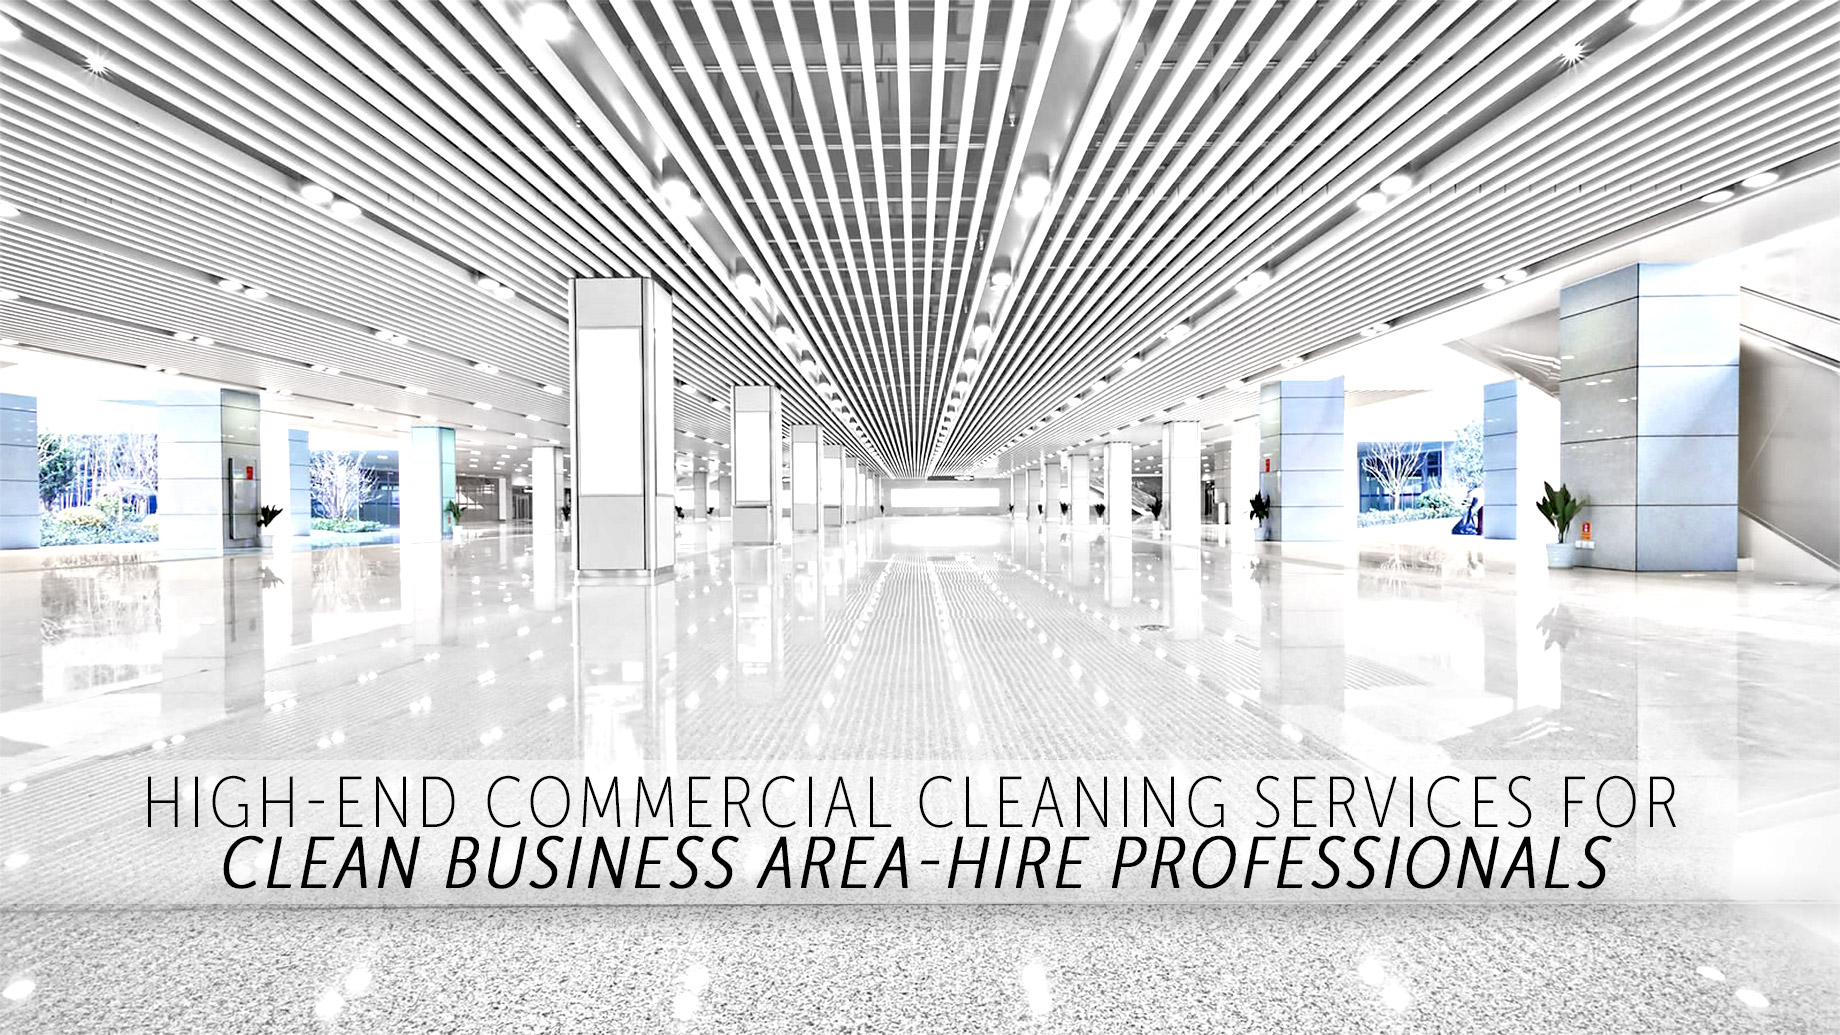 High-End Commercial Cleaning Services - For Clean Business Areas Hire Professionals